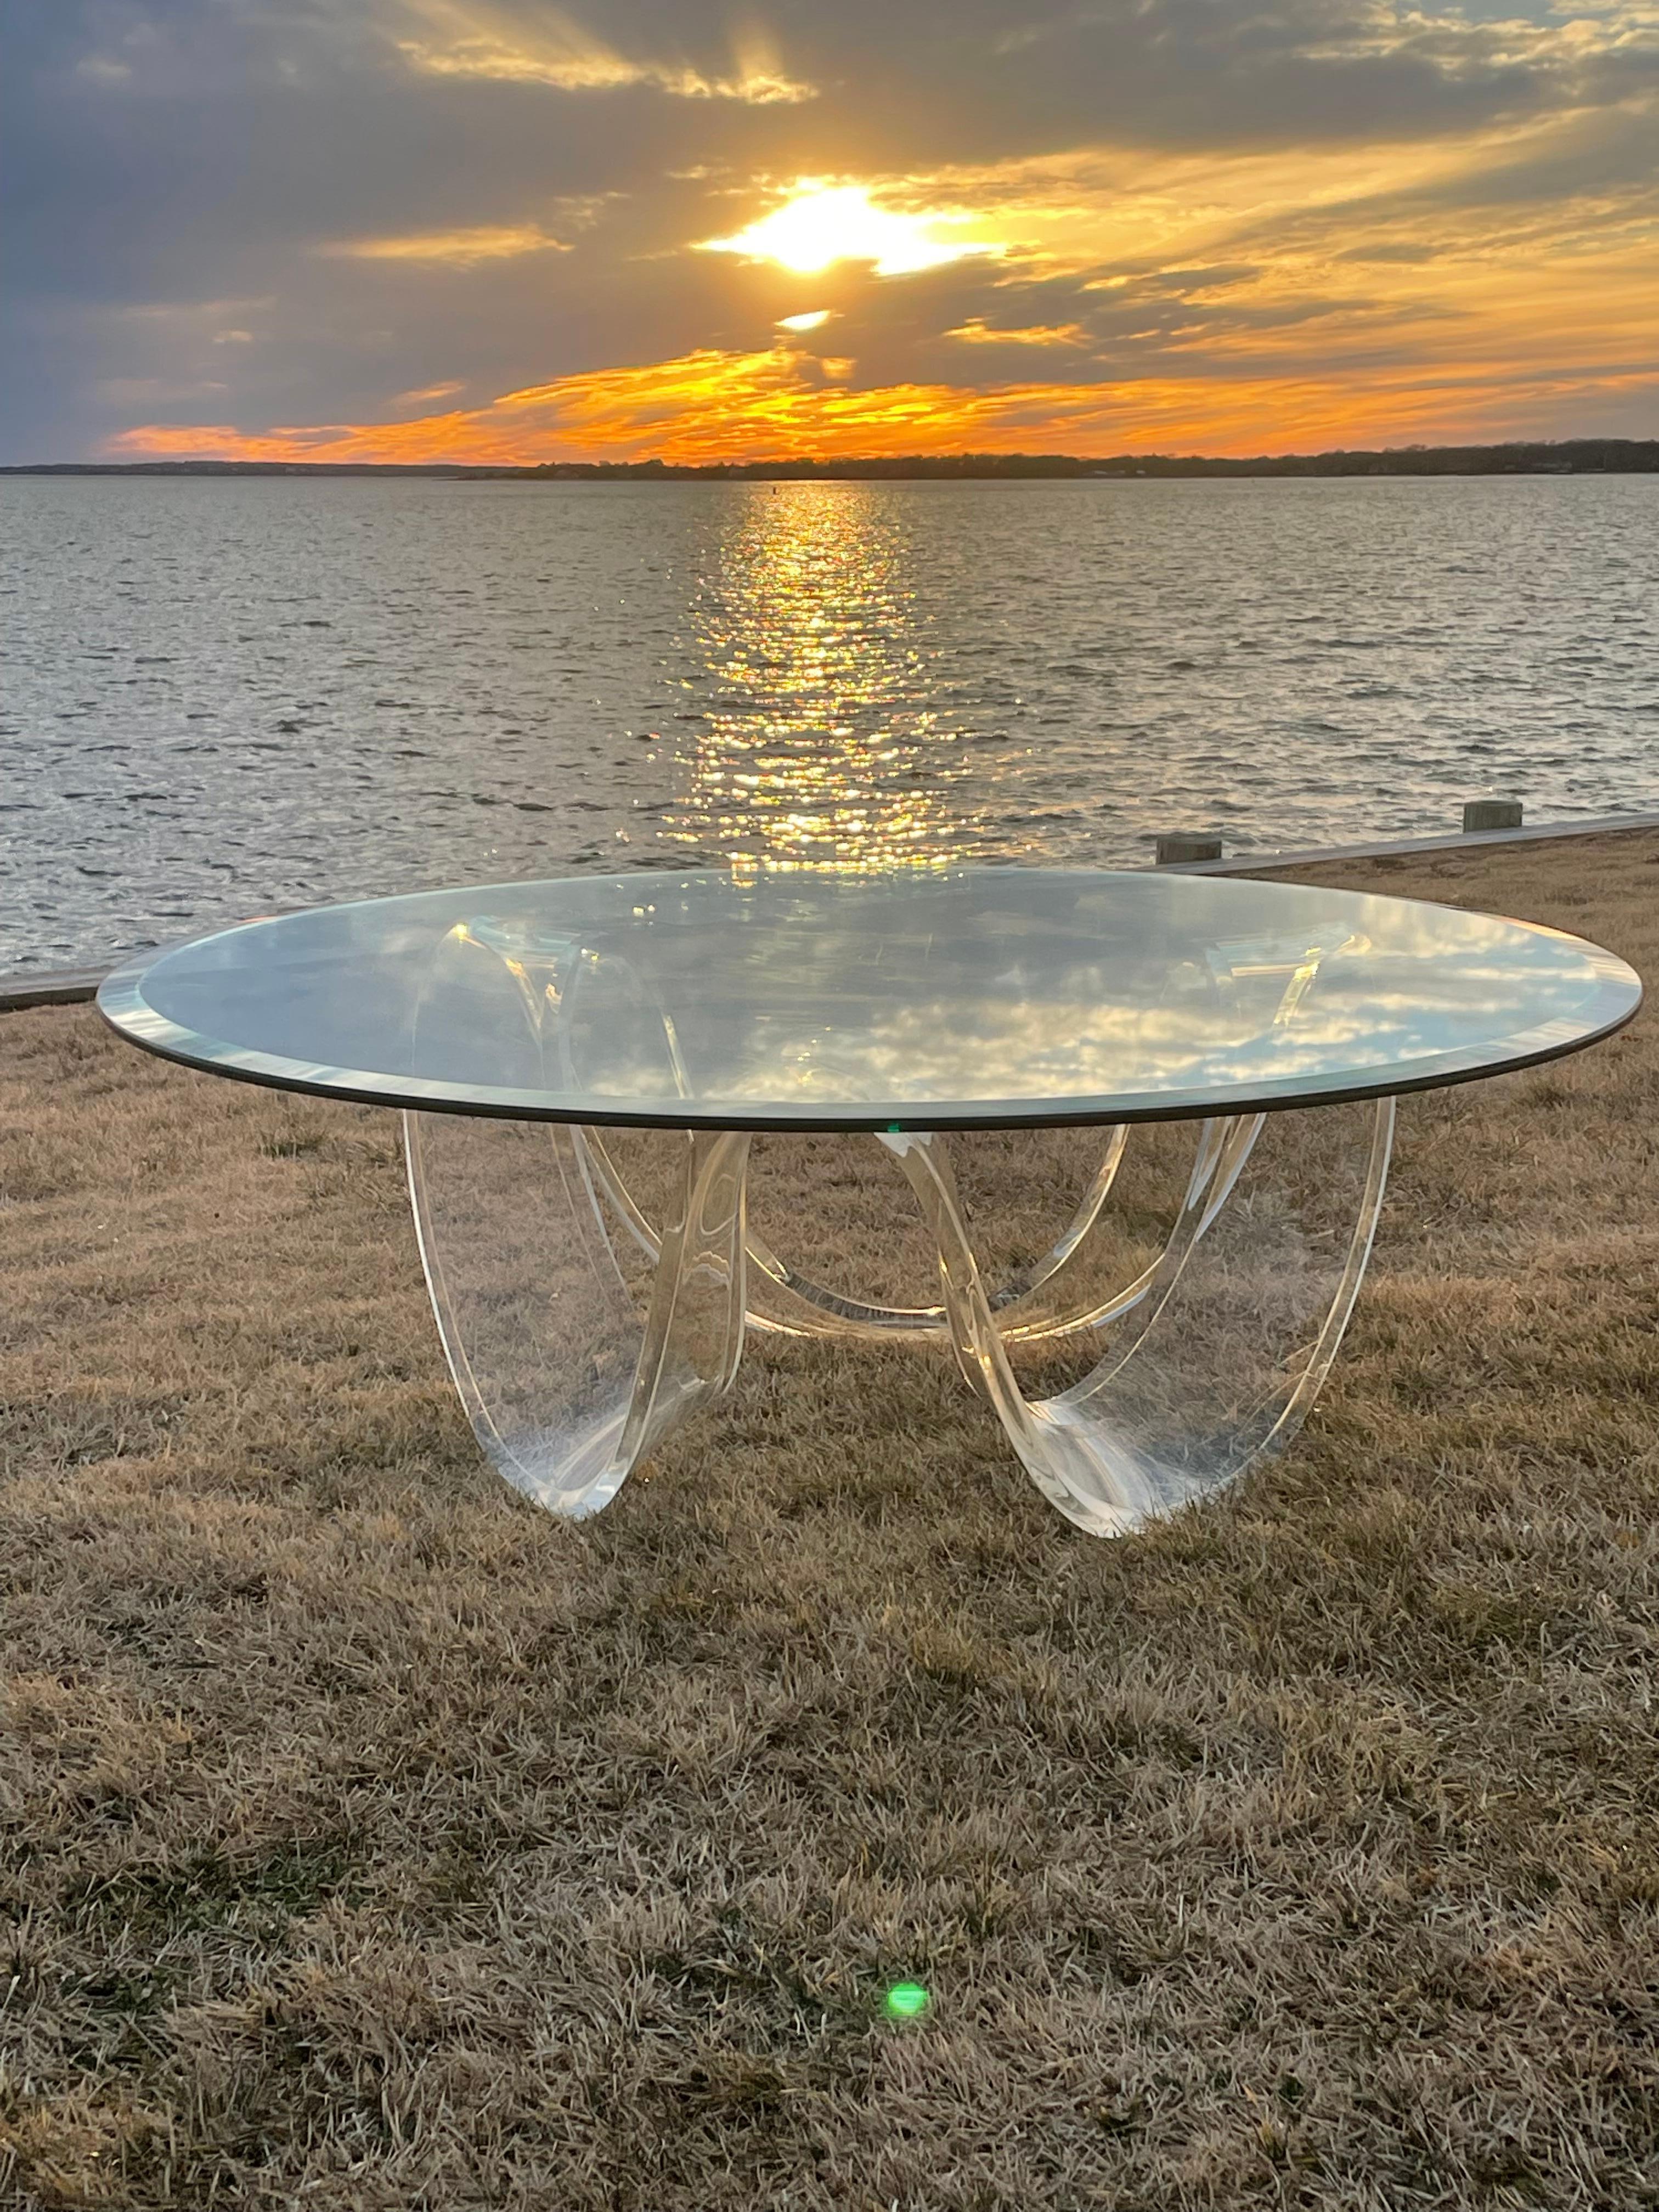 Mid Century Modern lucite ribbon coffee table . Sexy sculptural base that arches up and down in a continuous wave loop . The glass top has a beveled edge .Great modern design for any decor .Very good Condition .
Glass Top is 44” Diameter
Lucite Base